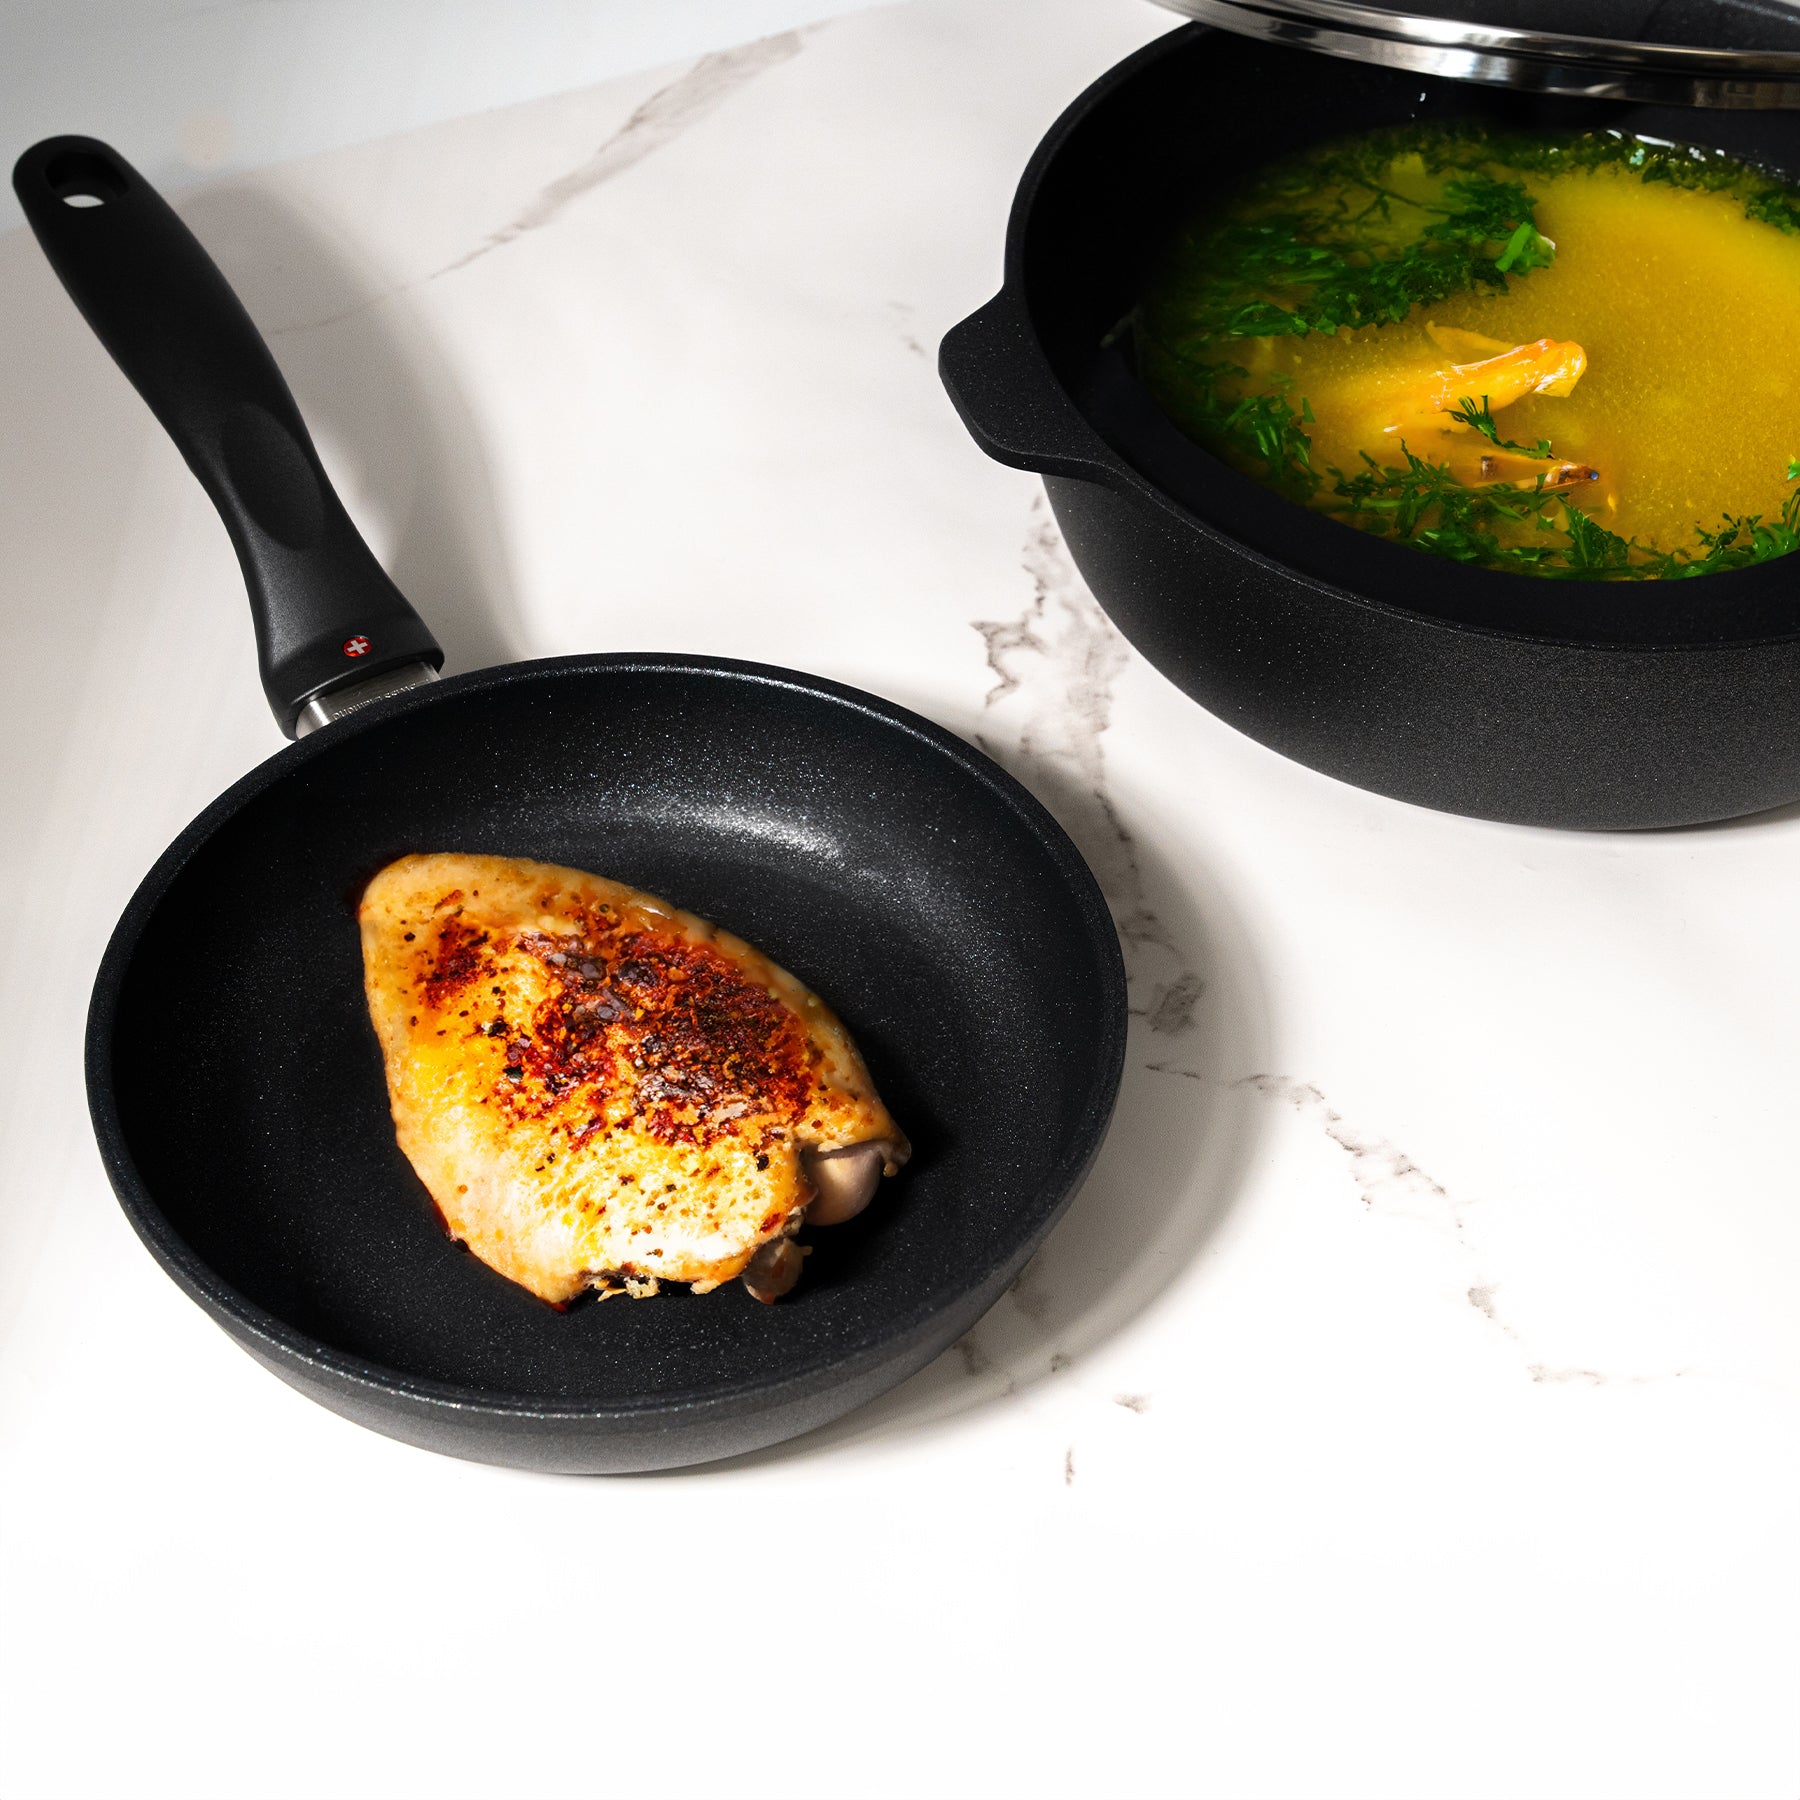 XD Nonstick 8" Fry Pan and 3.8 qt Saute Pan with Glass Lid Set in use with food on surface of pan sitting on kitchen pan